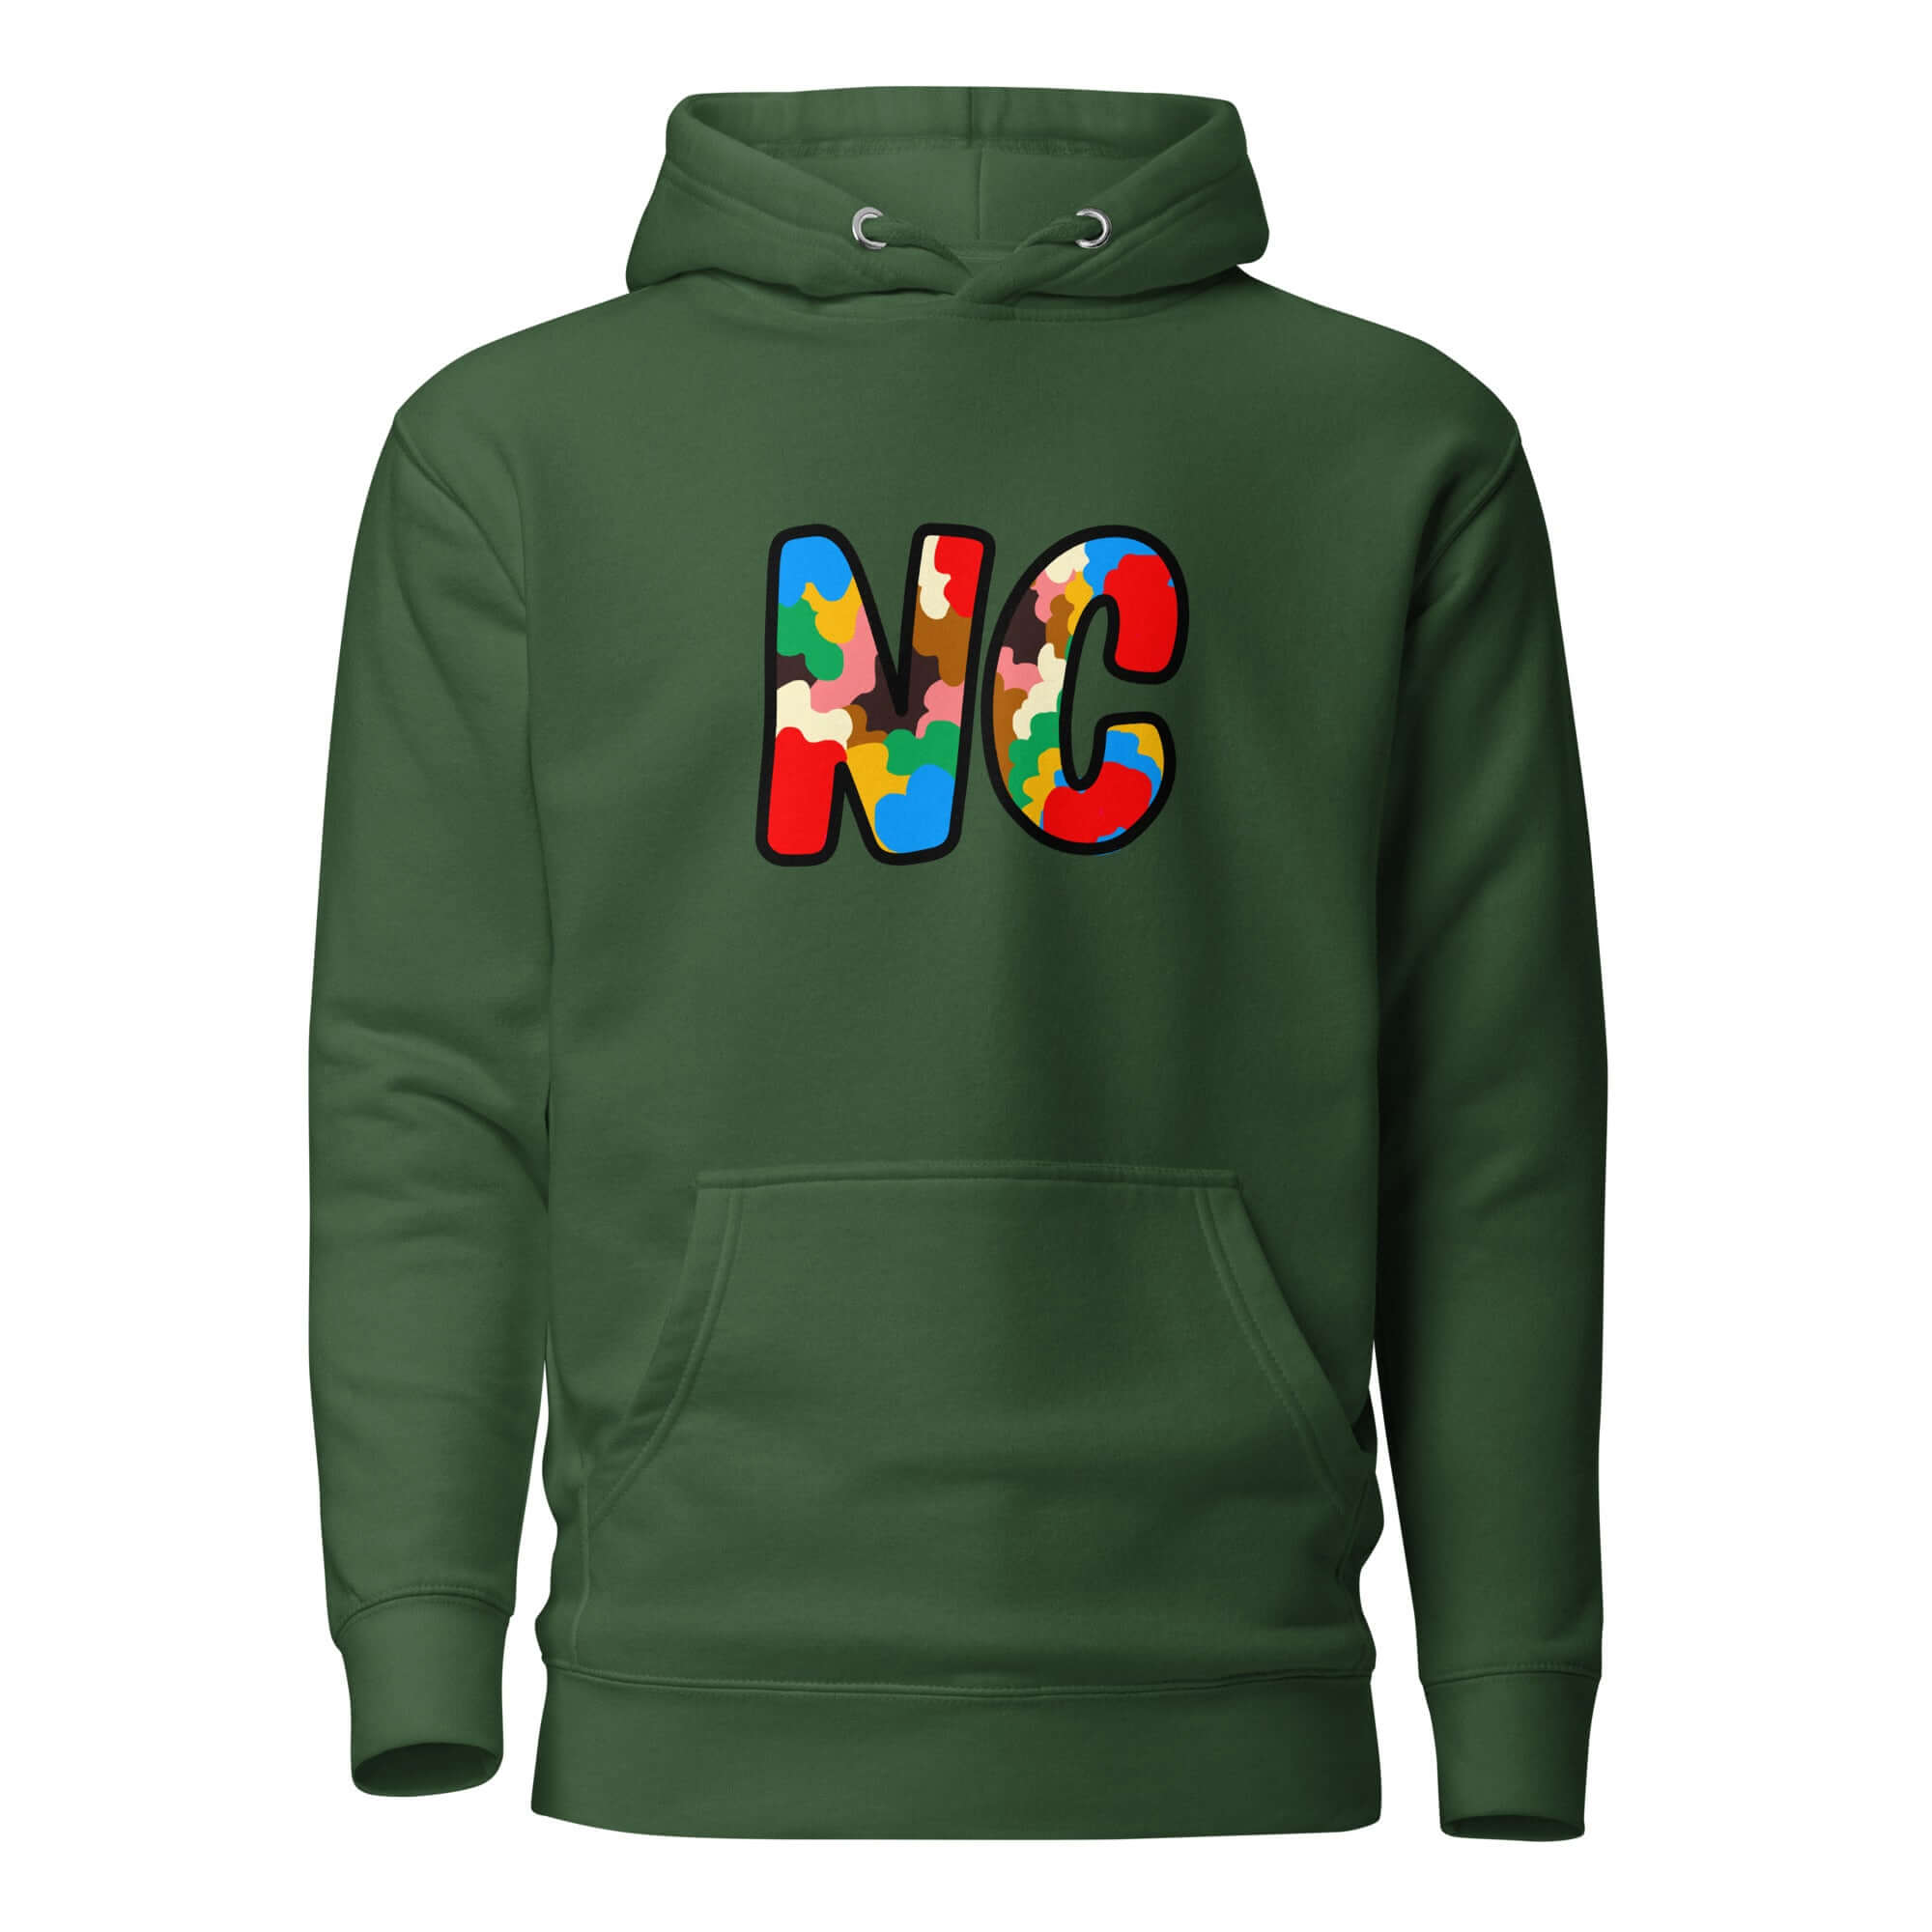 The City Collection NC Unisex Hoodie